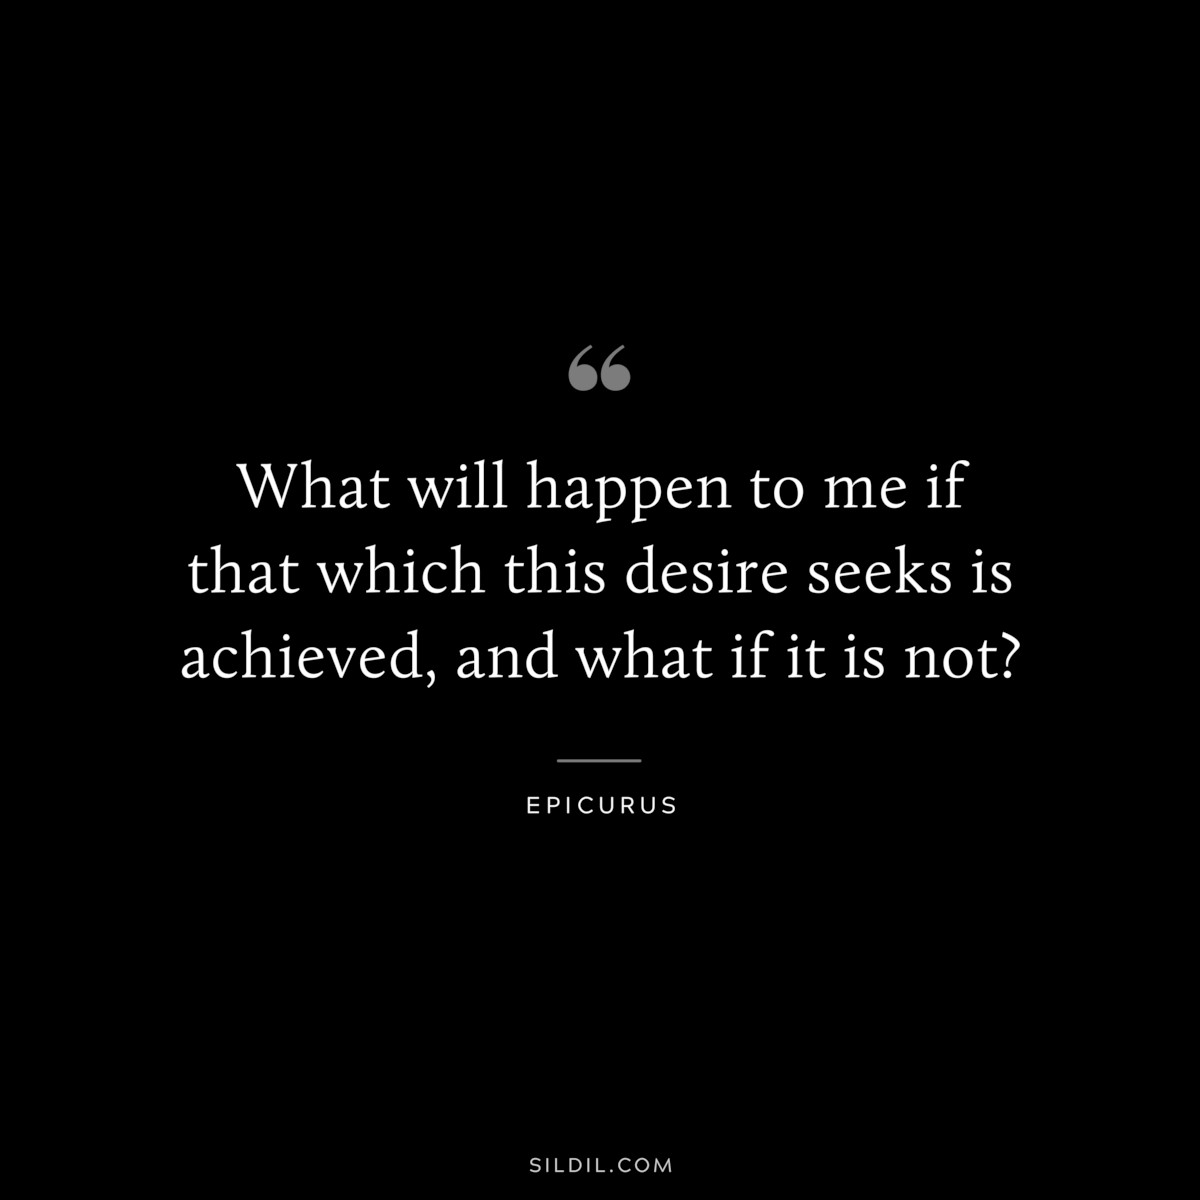 What will happen to me if that which this desire seeks is achieved, and what if it is not? — Epicurus